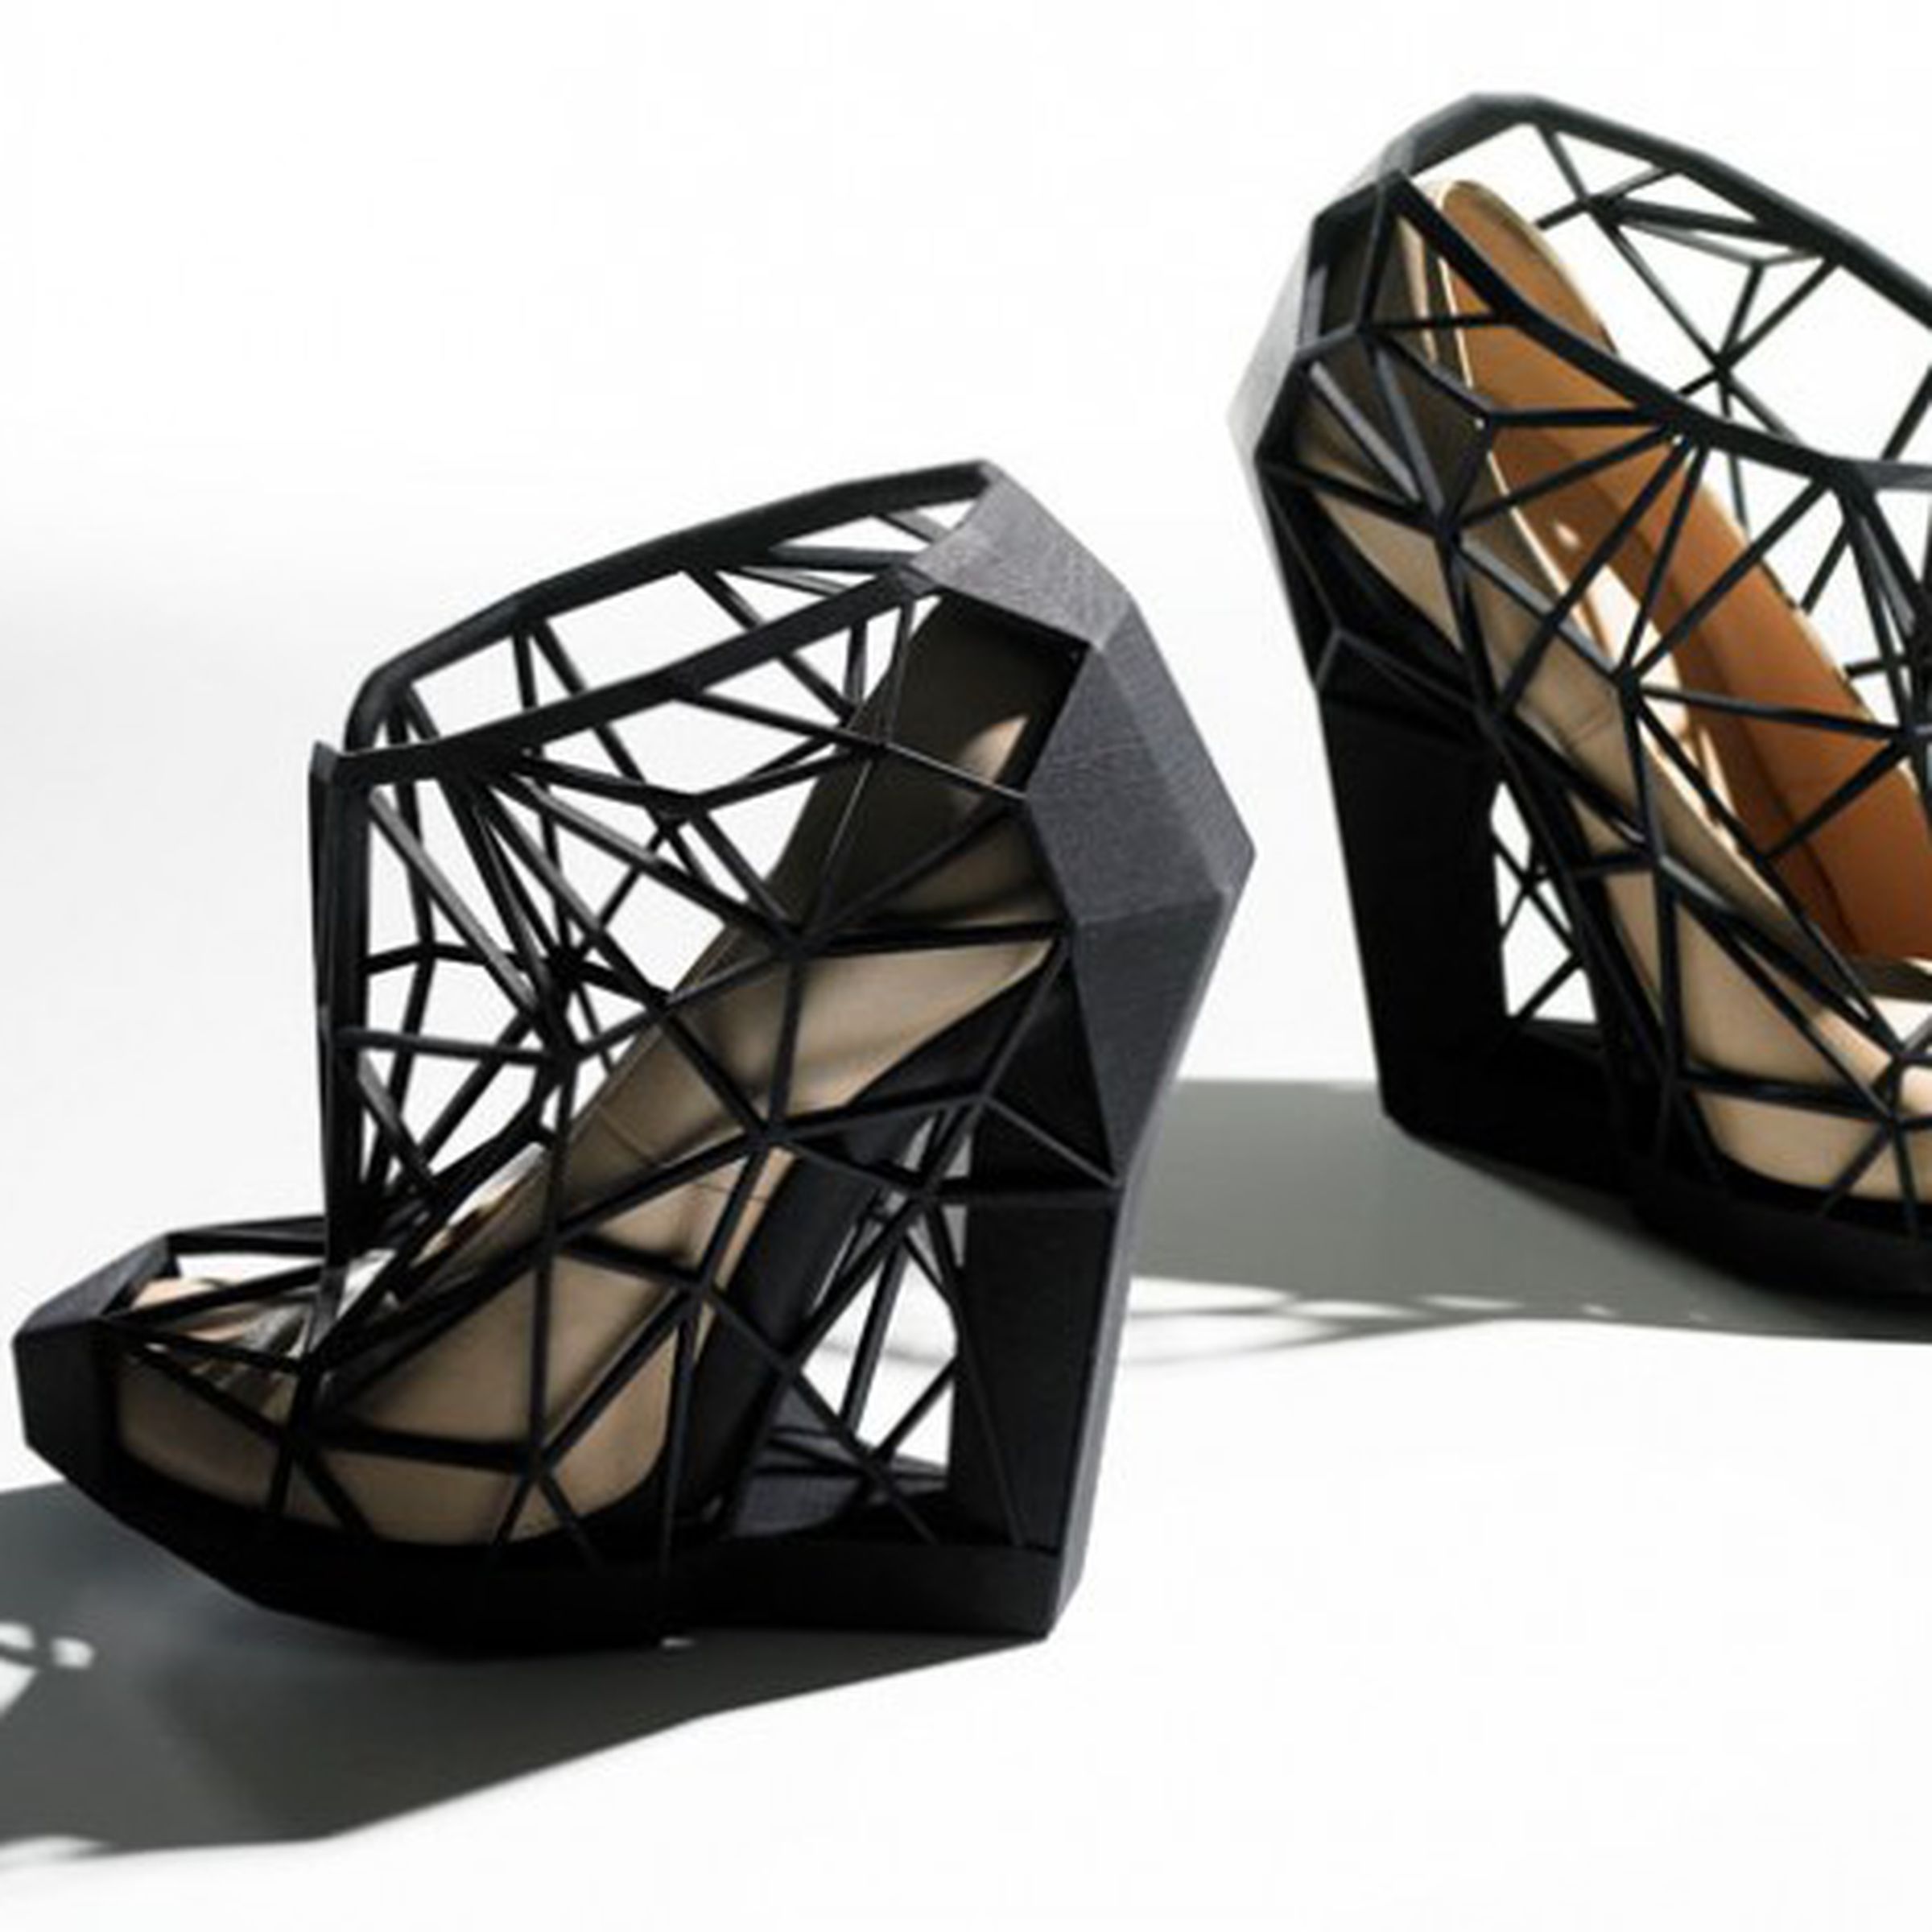 andreia chaves 3d printed shoes